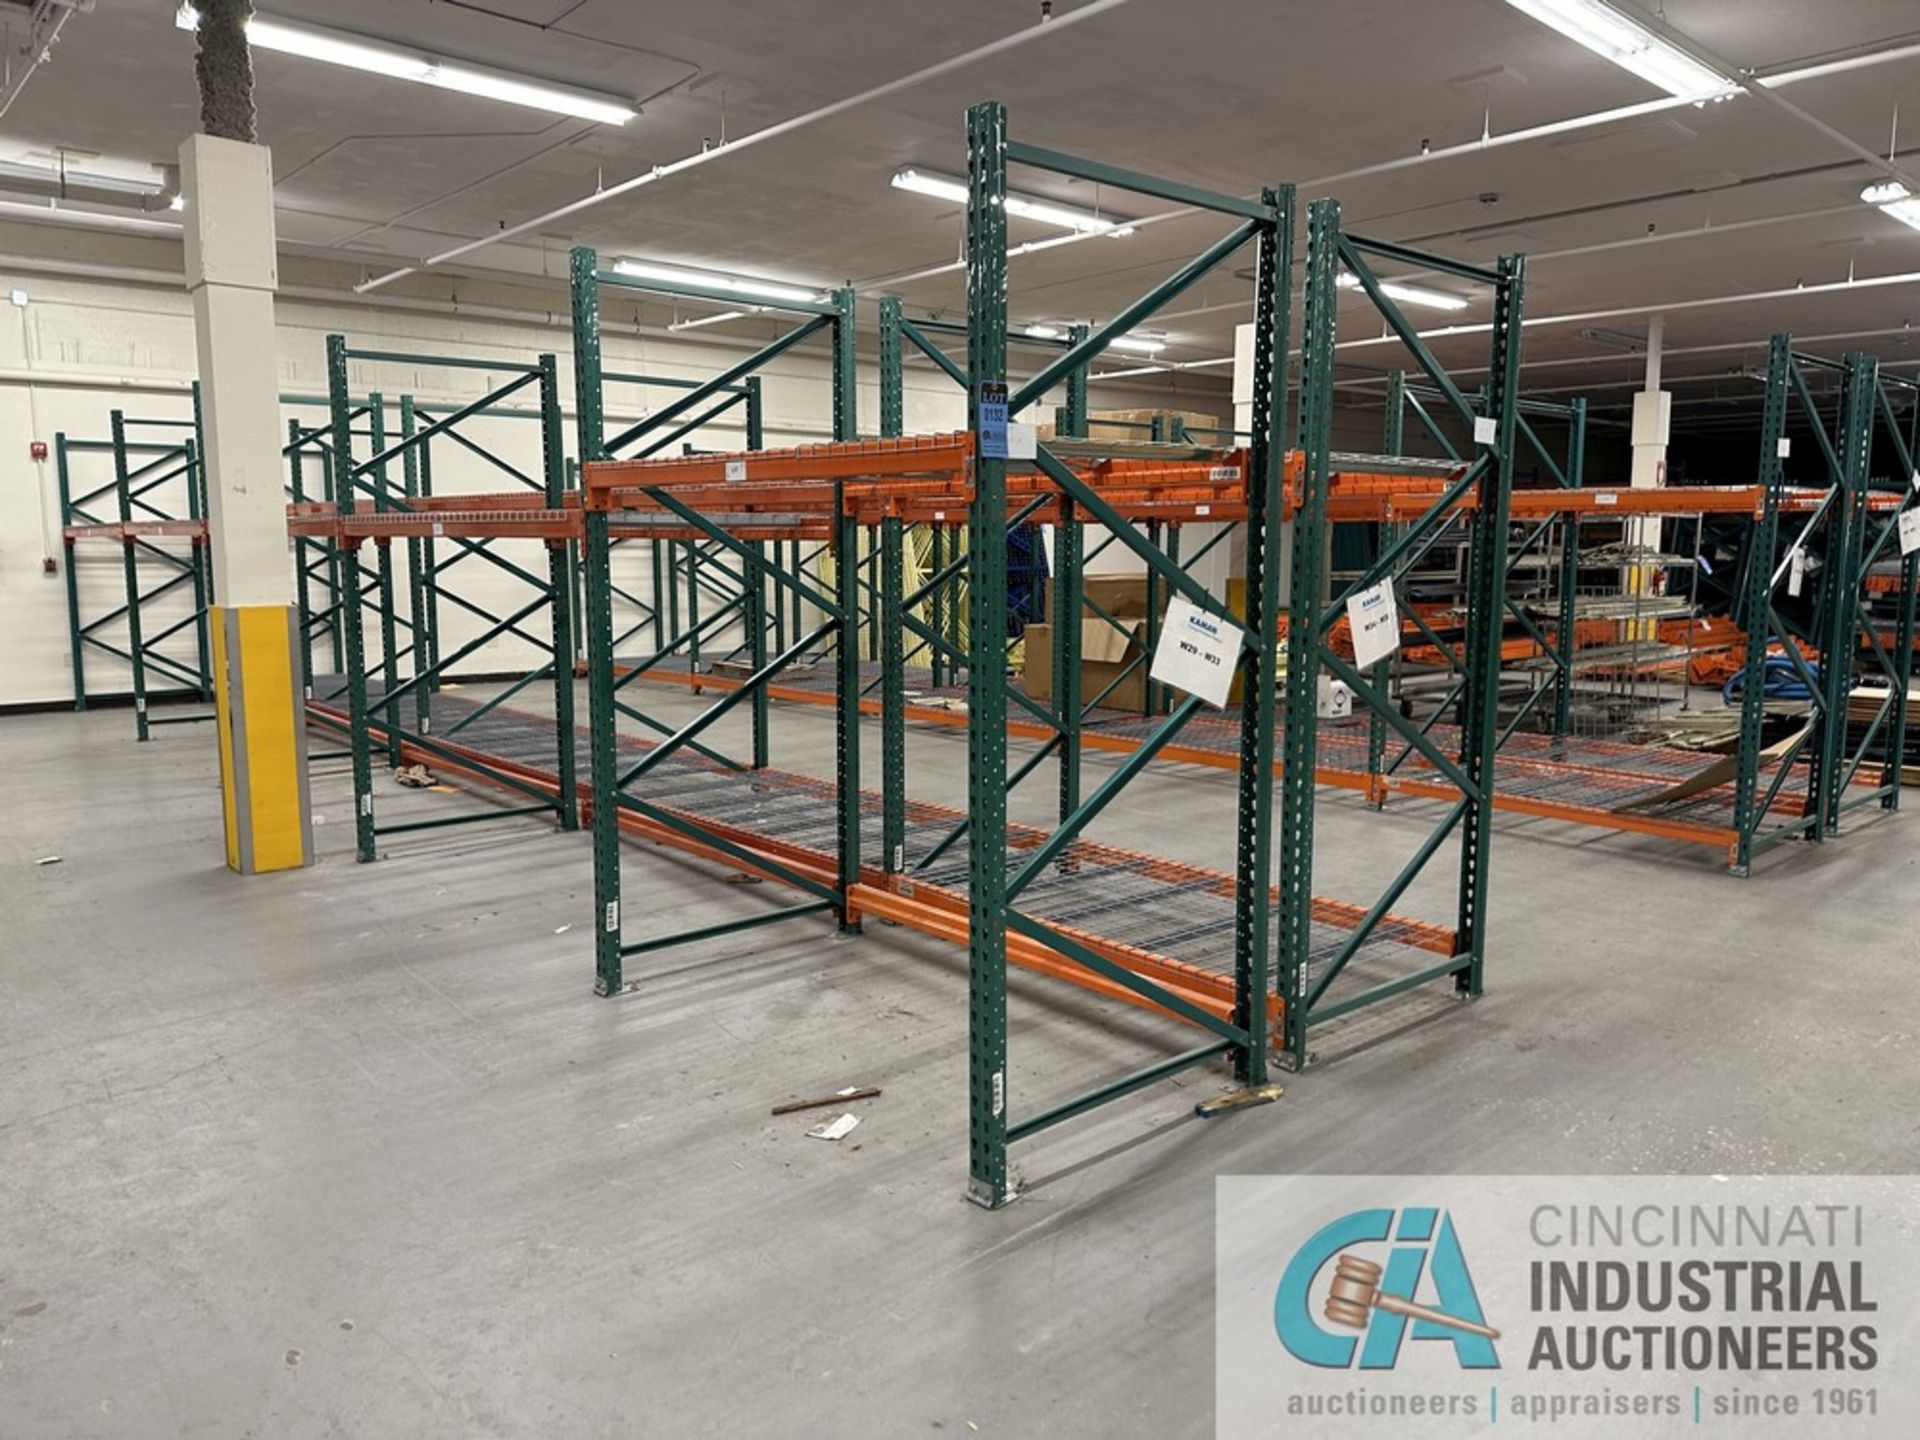 (LOT) (8) SECTIONS 96" X 42" X 96" AND (2) SECTIONS 72" X 42" X 96" ADJUSTABLE BEAM PALLET RACK